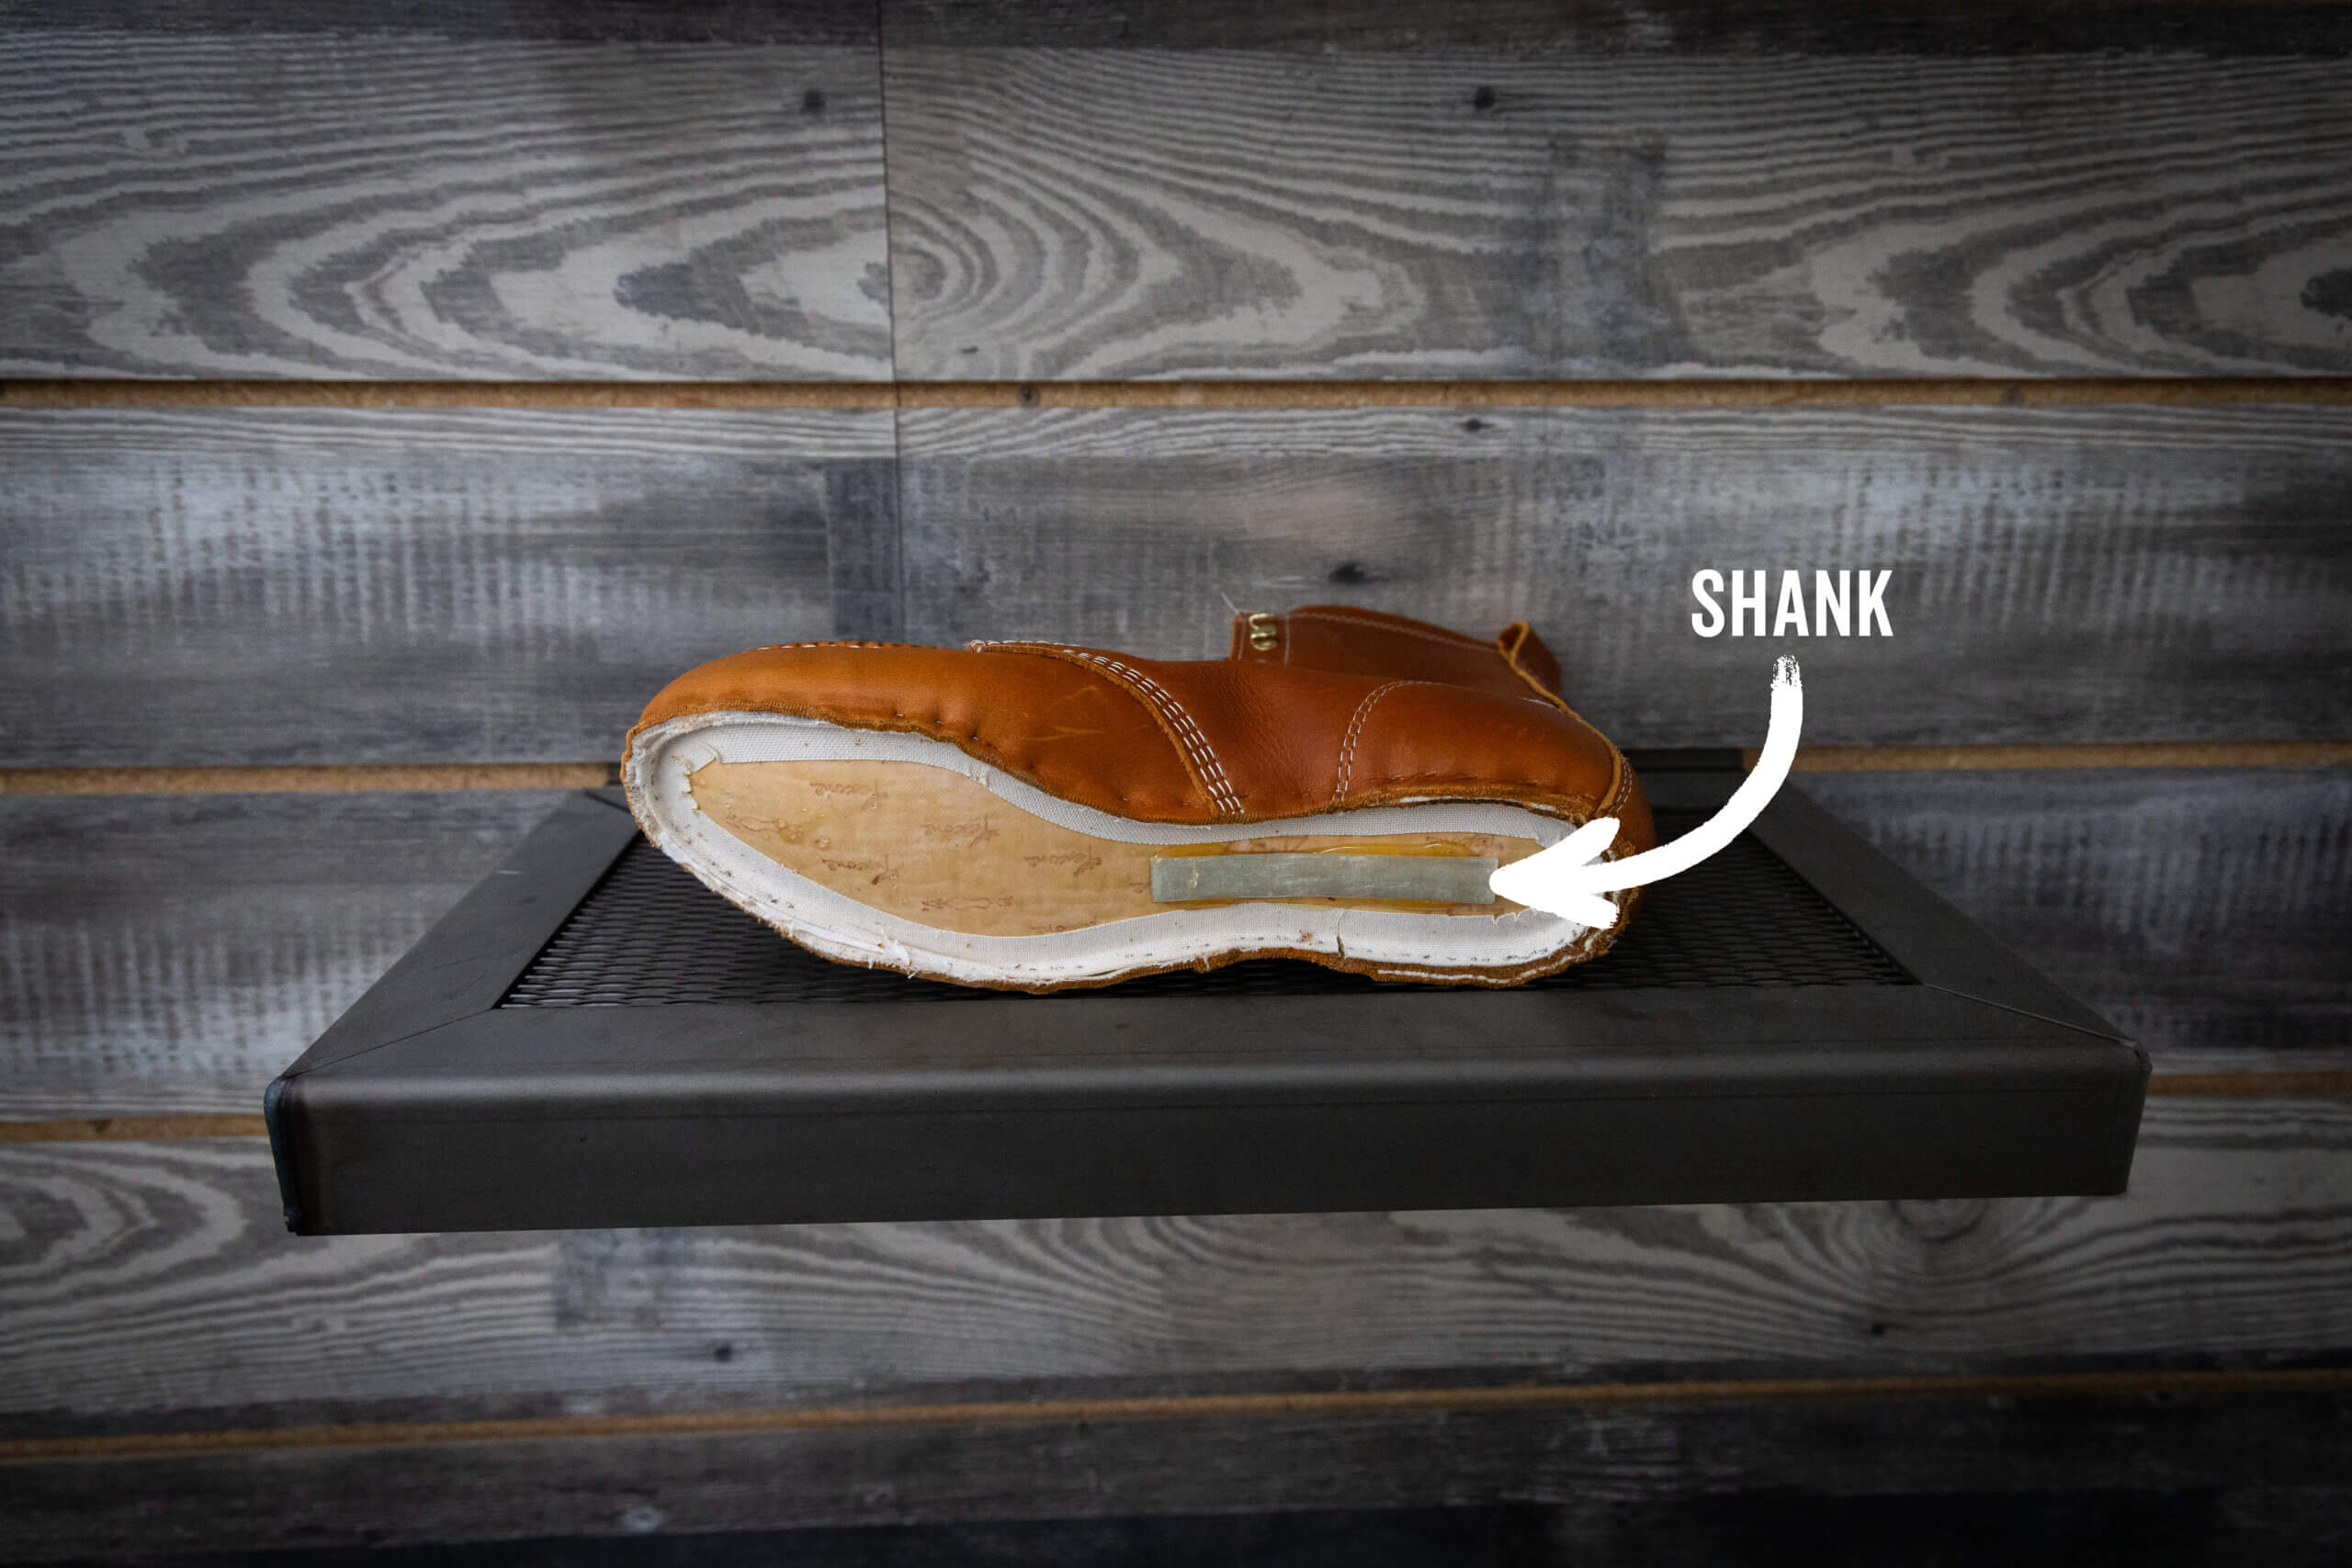 What is the shank of a boot?